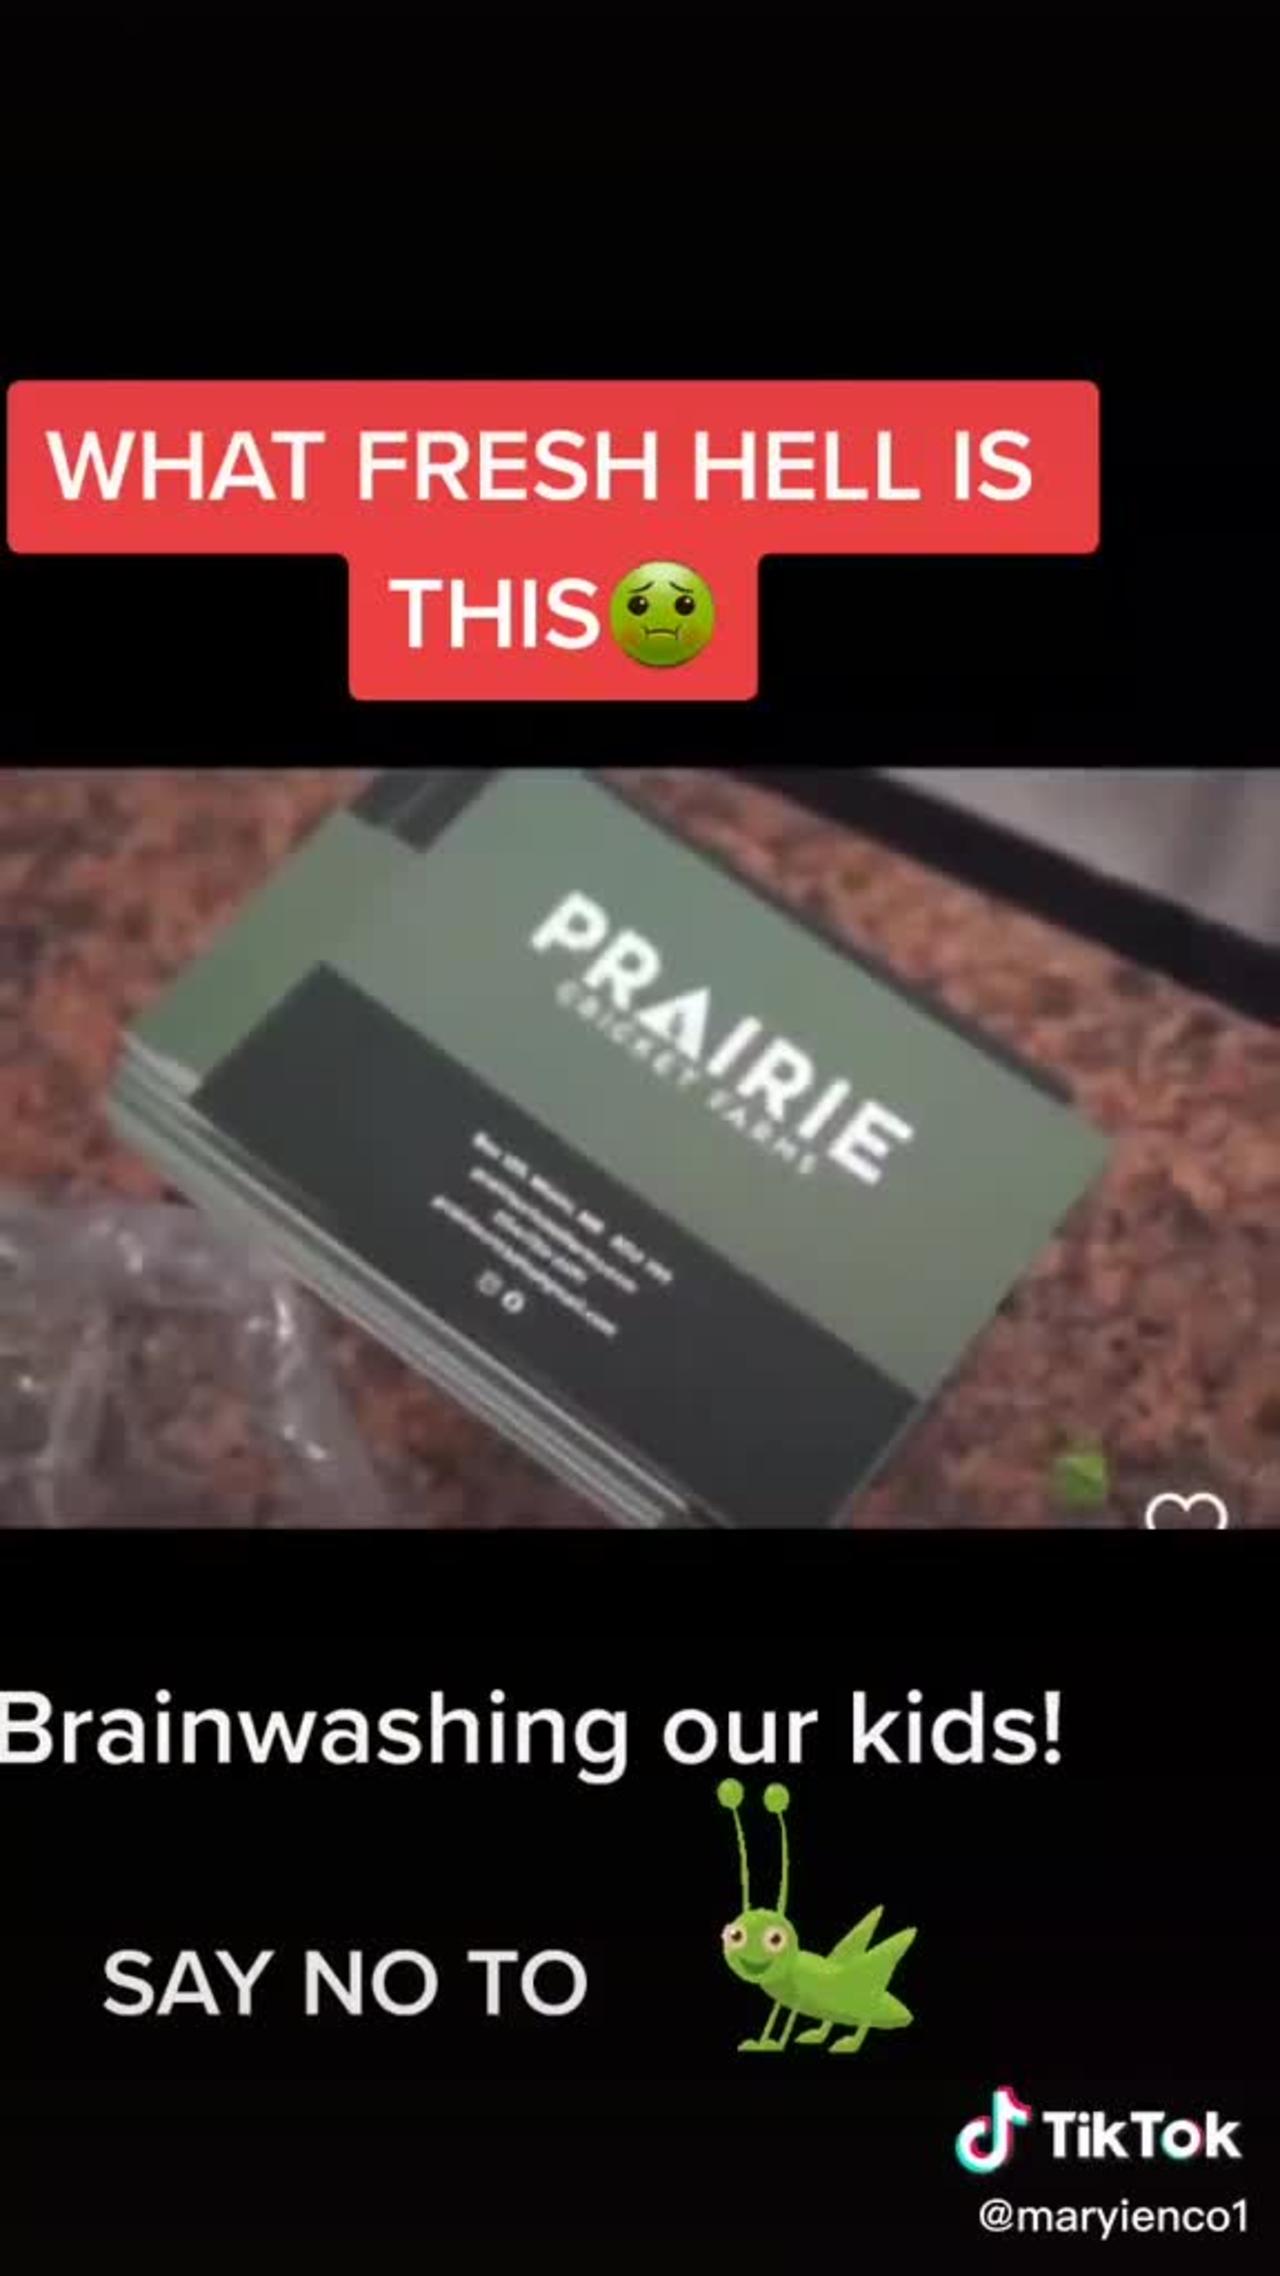 Manitoba, Canada Has Already Started Brainwashing The Kids In Schools - EAT BUGS 🐛